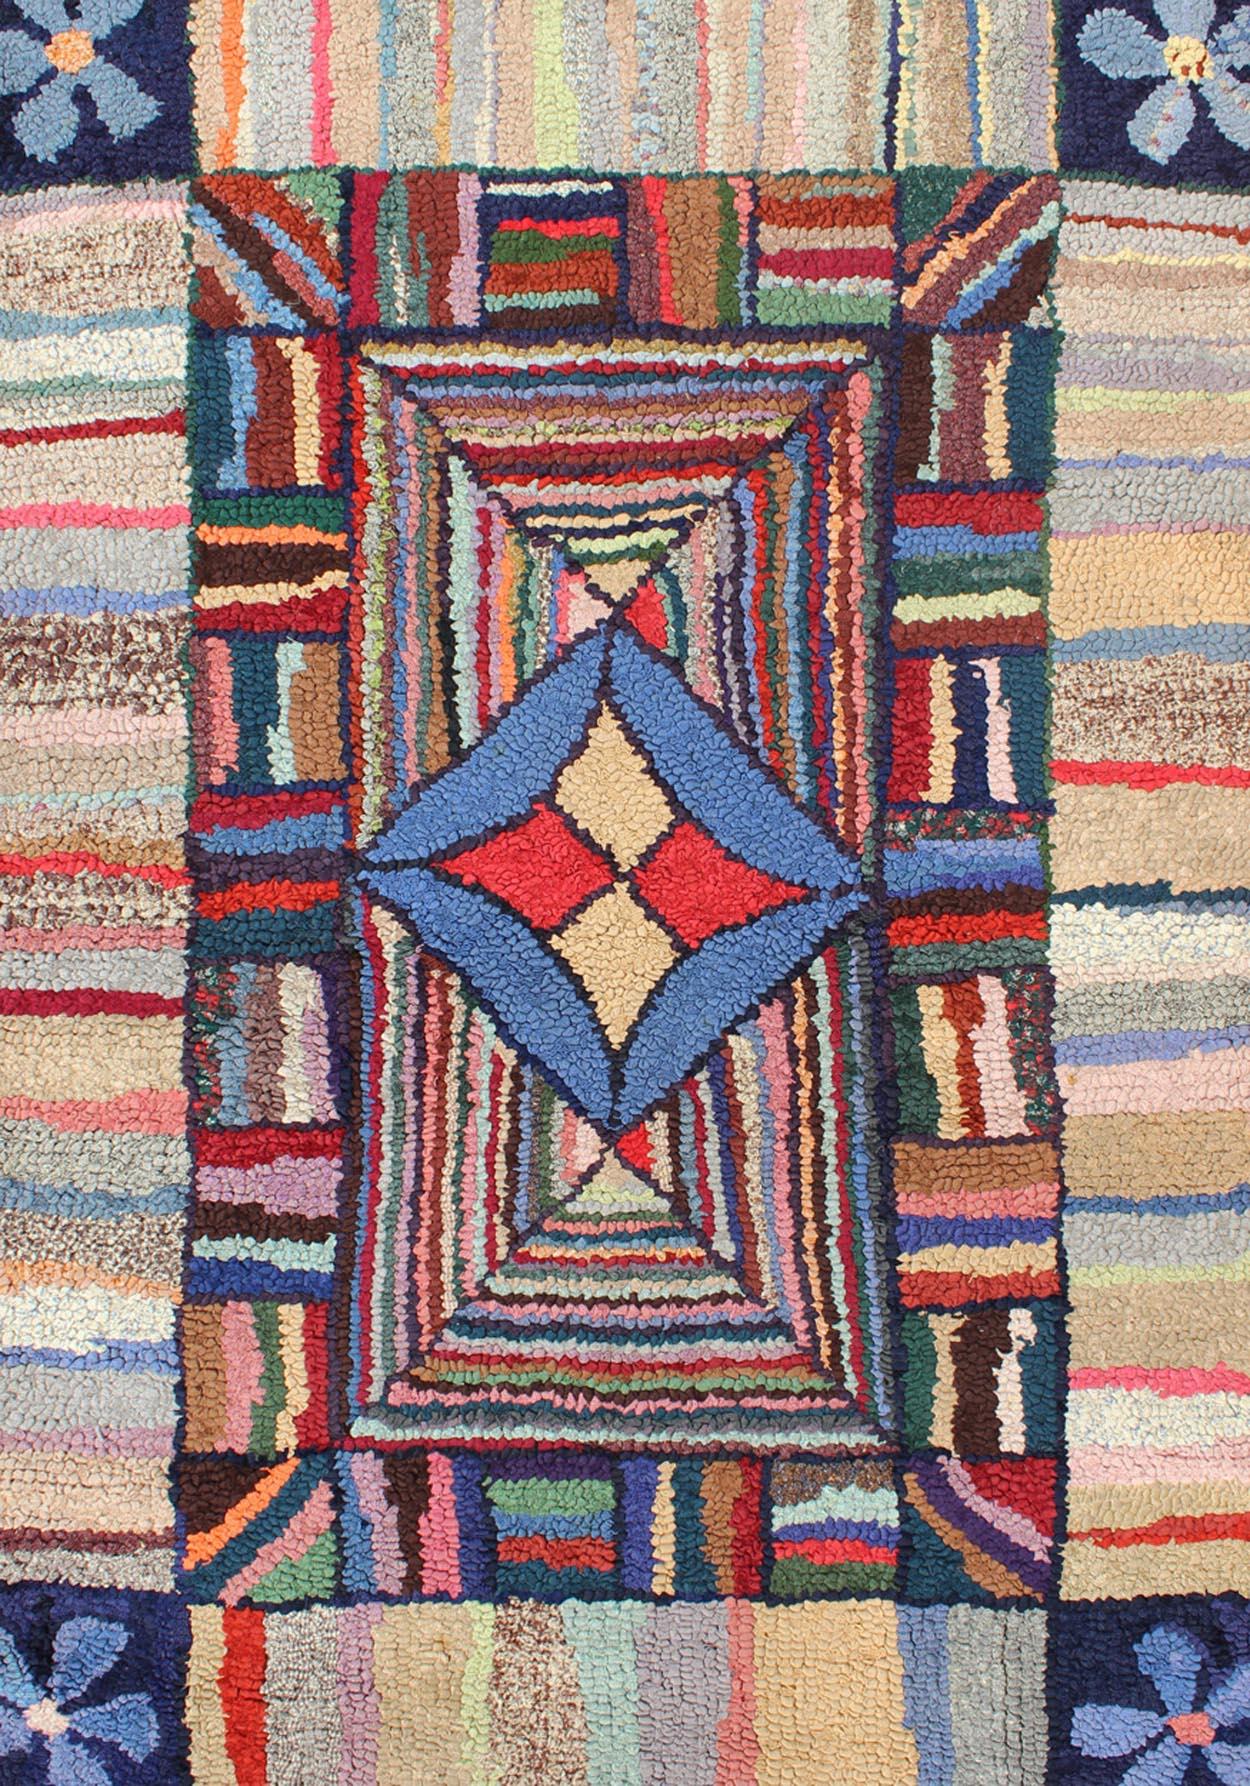 Hand-Woven Antique American Hooked Rug with Colorful Geometric Design with Striped Border